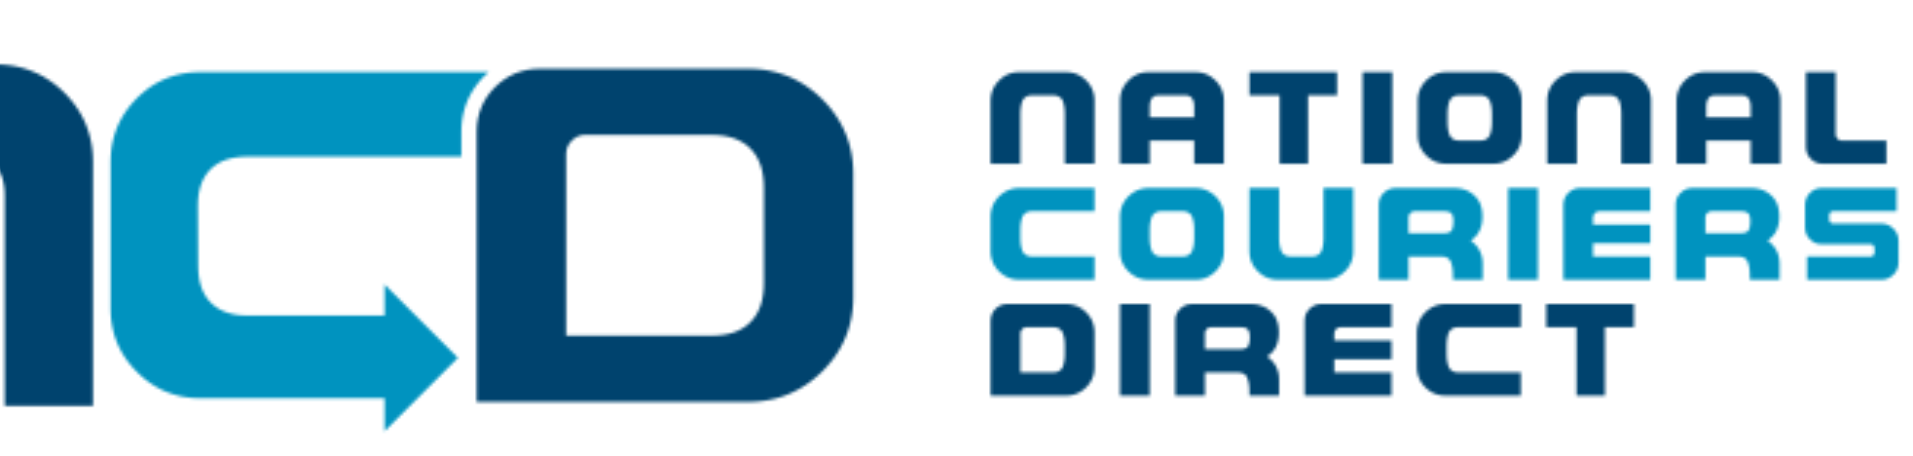 National Couriers Direct | Sameday Couriers